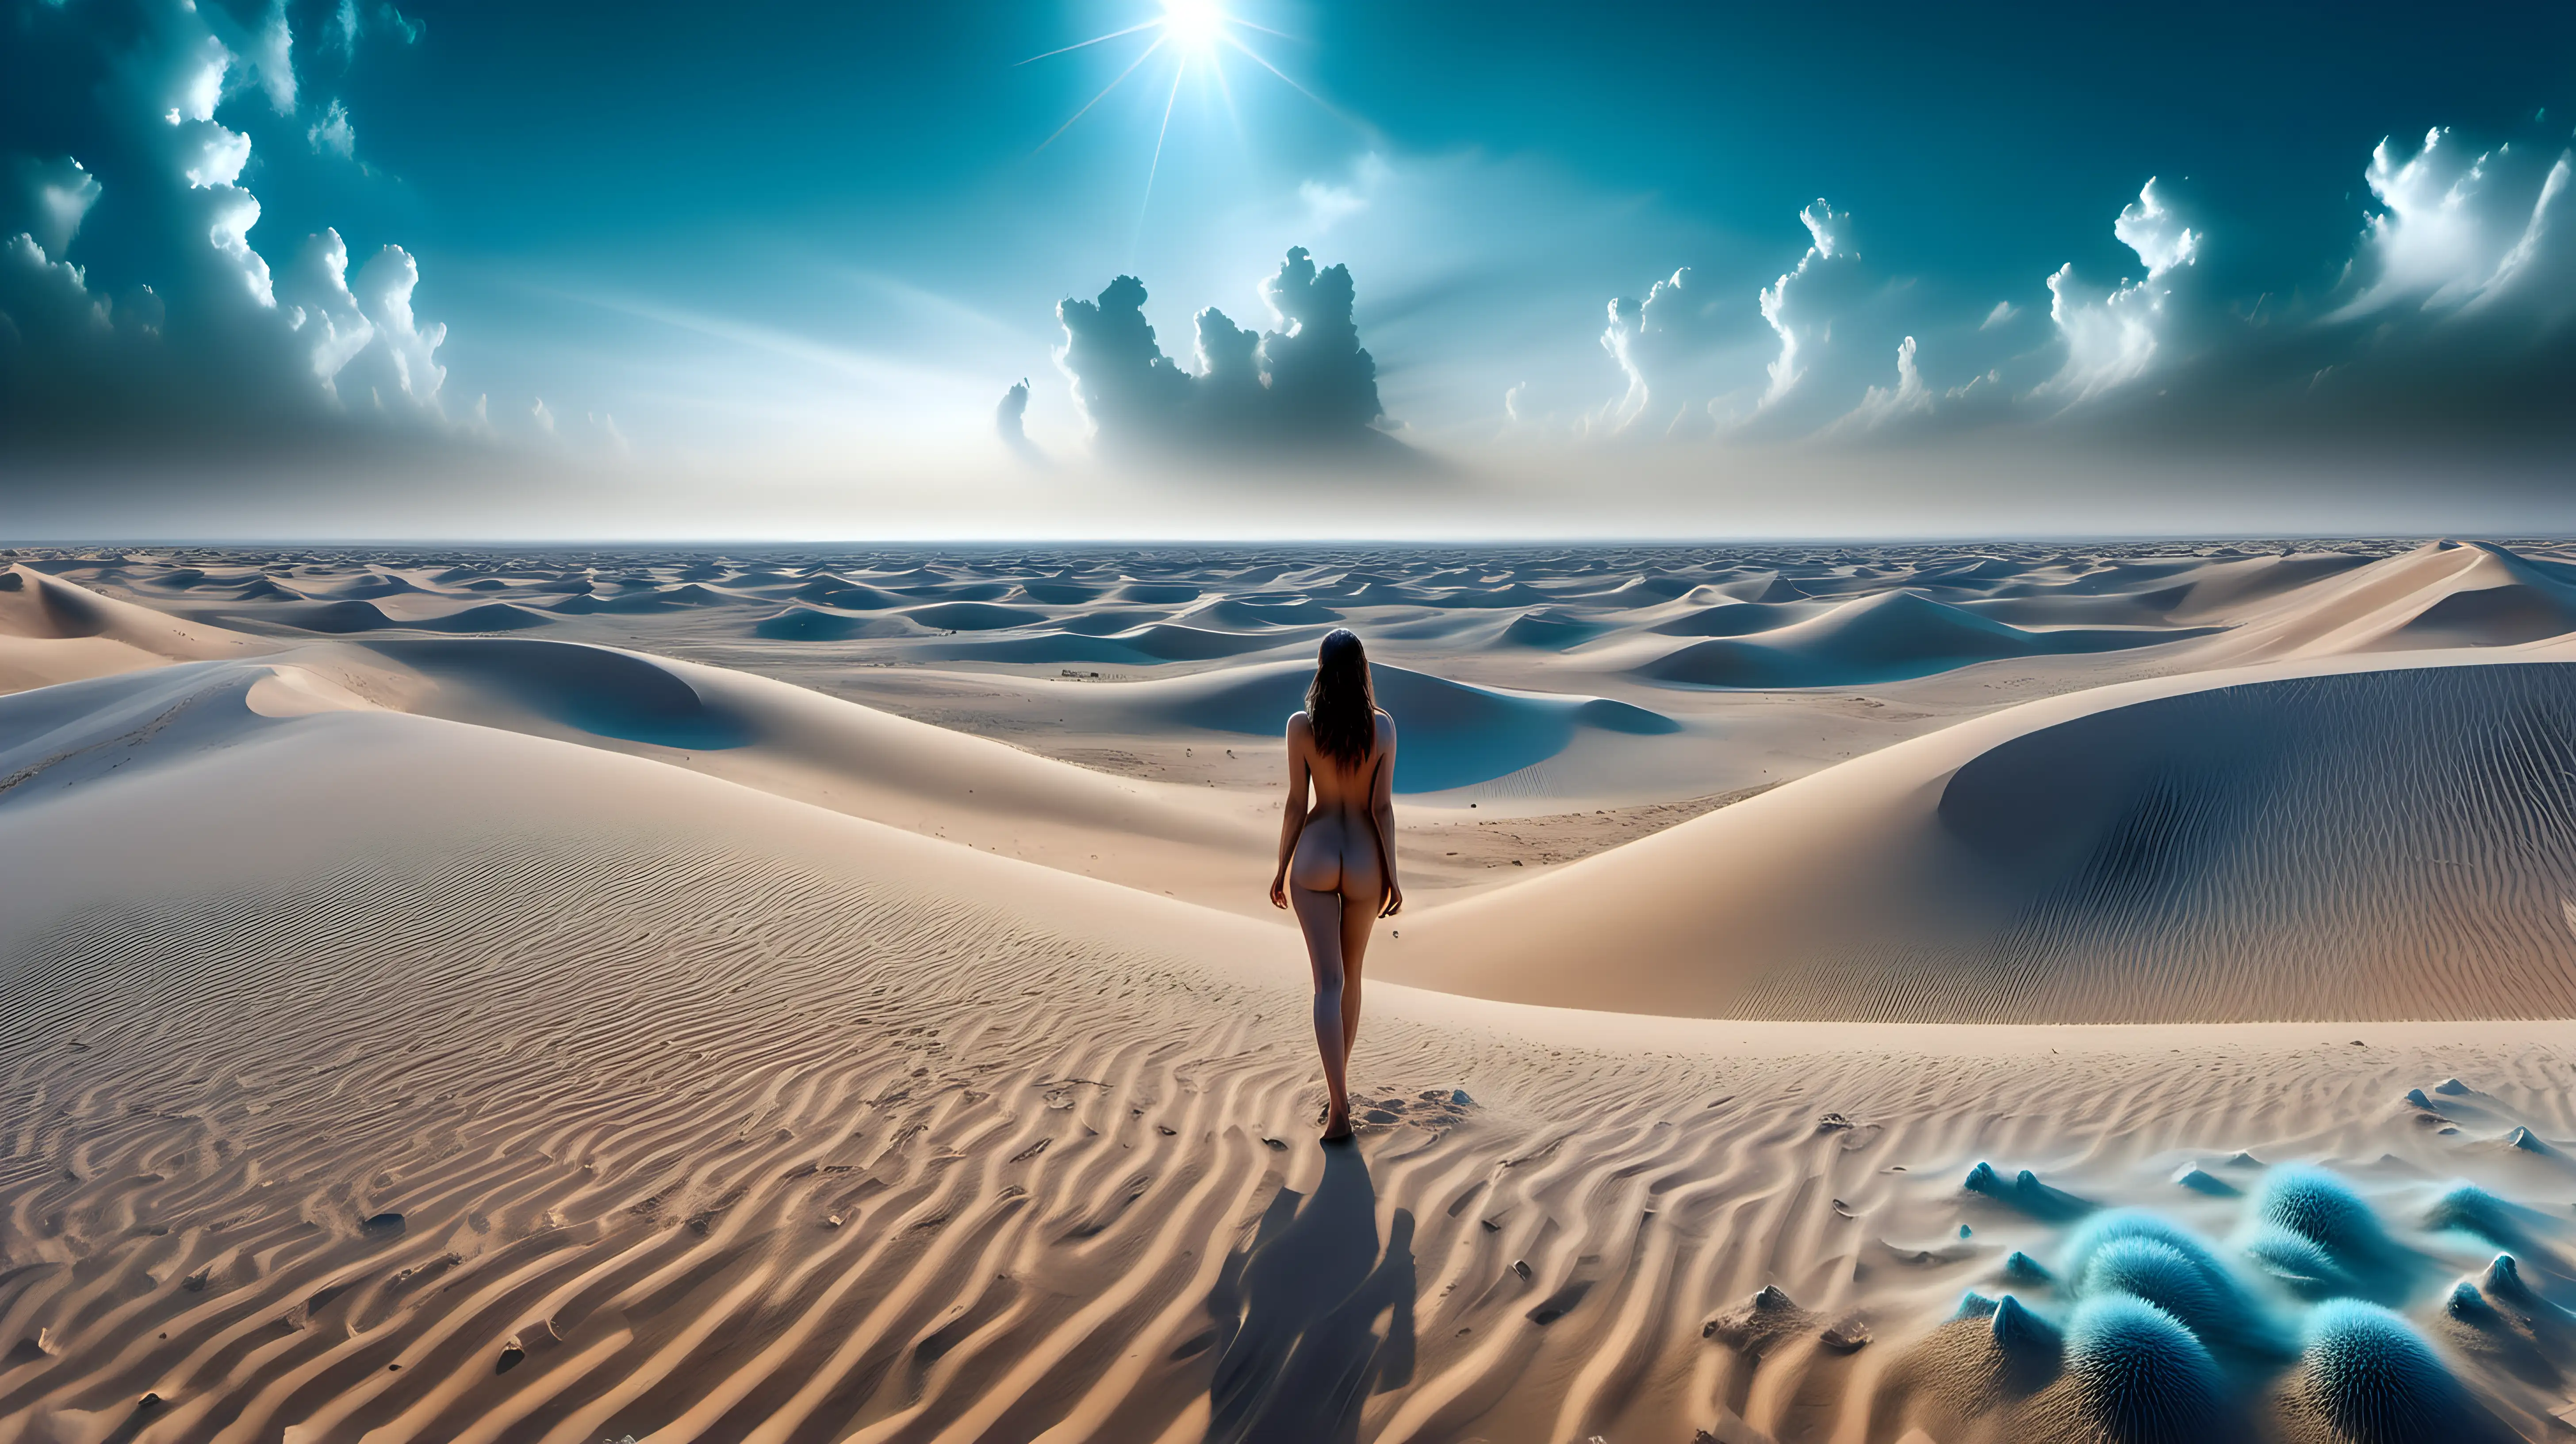 Psychedelic Nude Woman in Dubai Desert Landscape with Crystalline Mushrooms